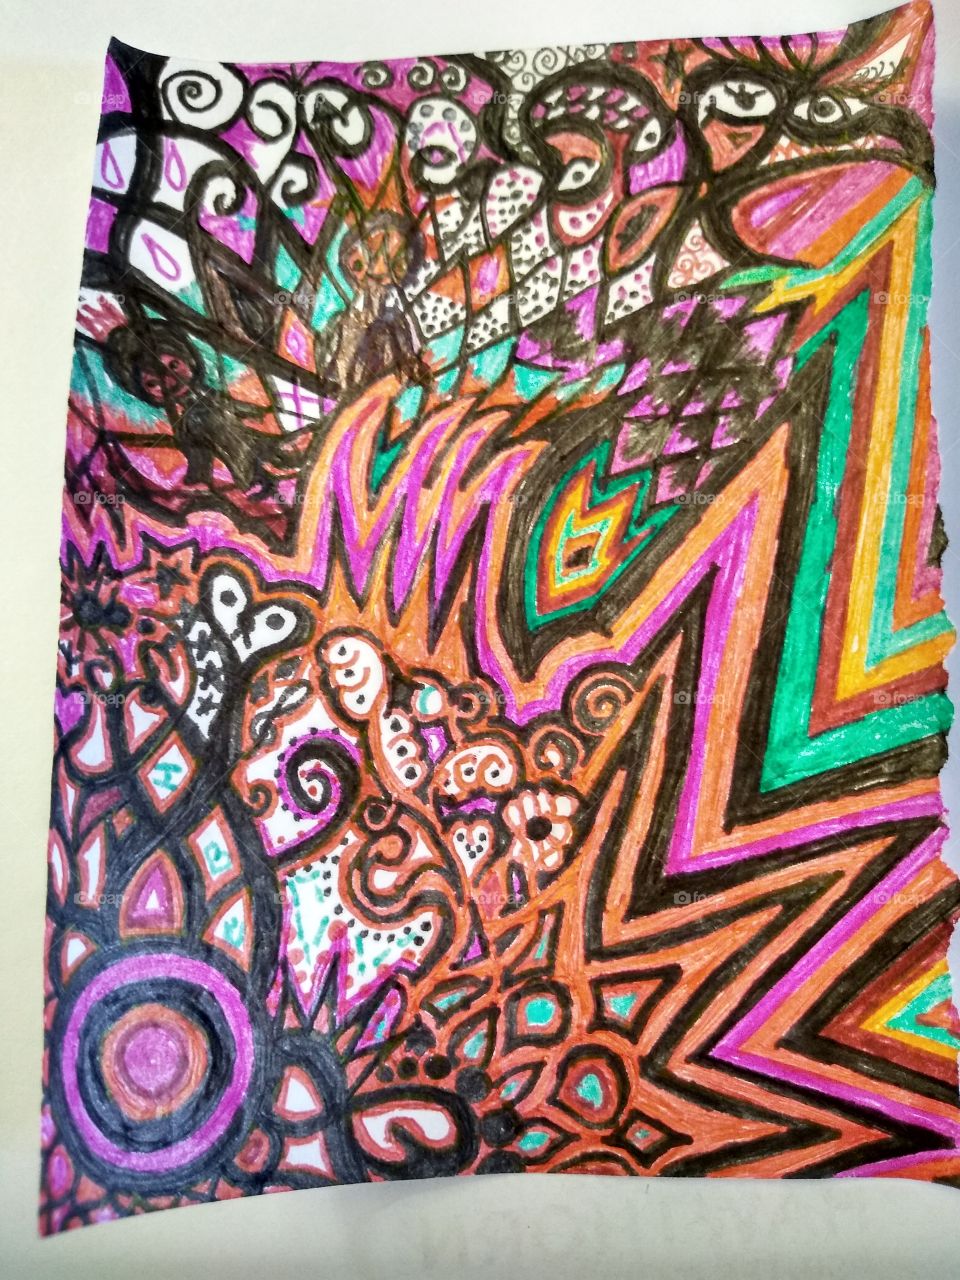 added color to this doodle.. Sometimes things look amazing in color. Other times it's better in Black and White